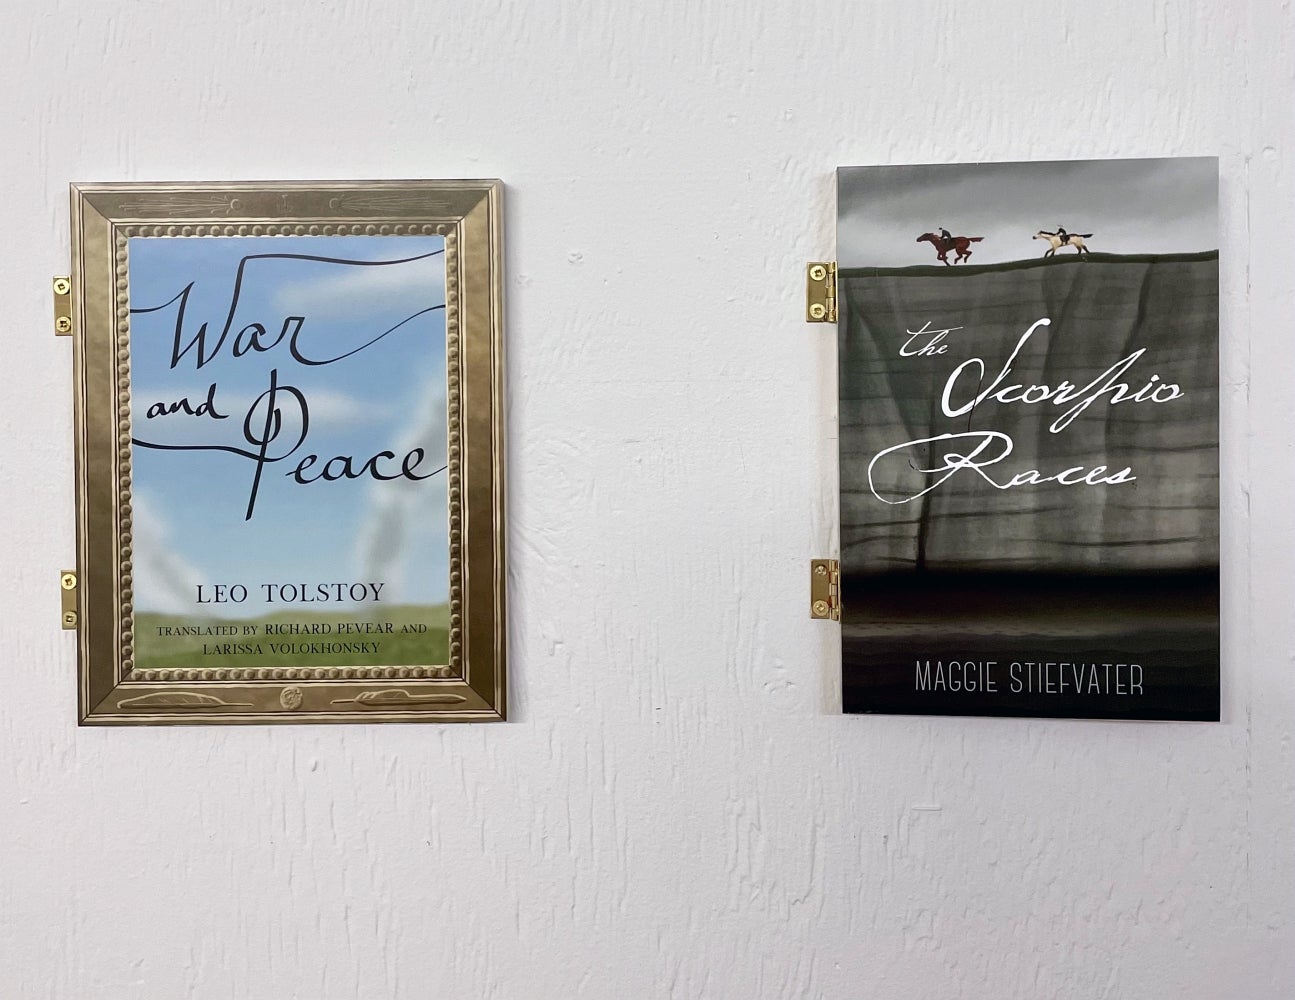 Art installation of 2 book covers attached to the wall with hinges titled "War and peace" and "The scorpio races"